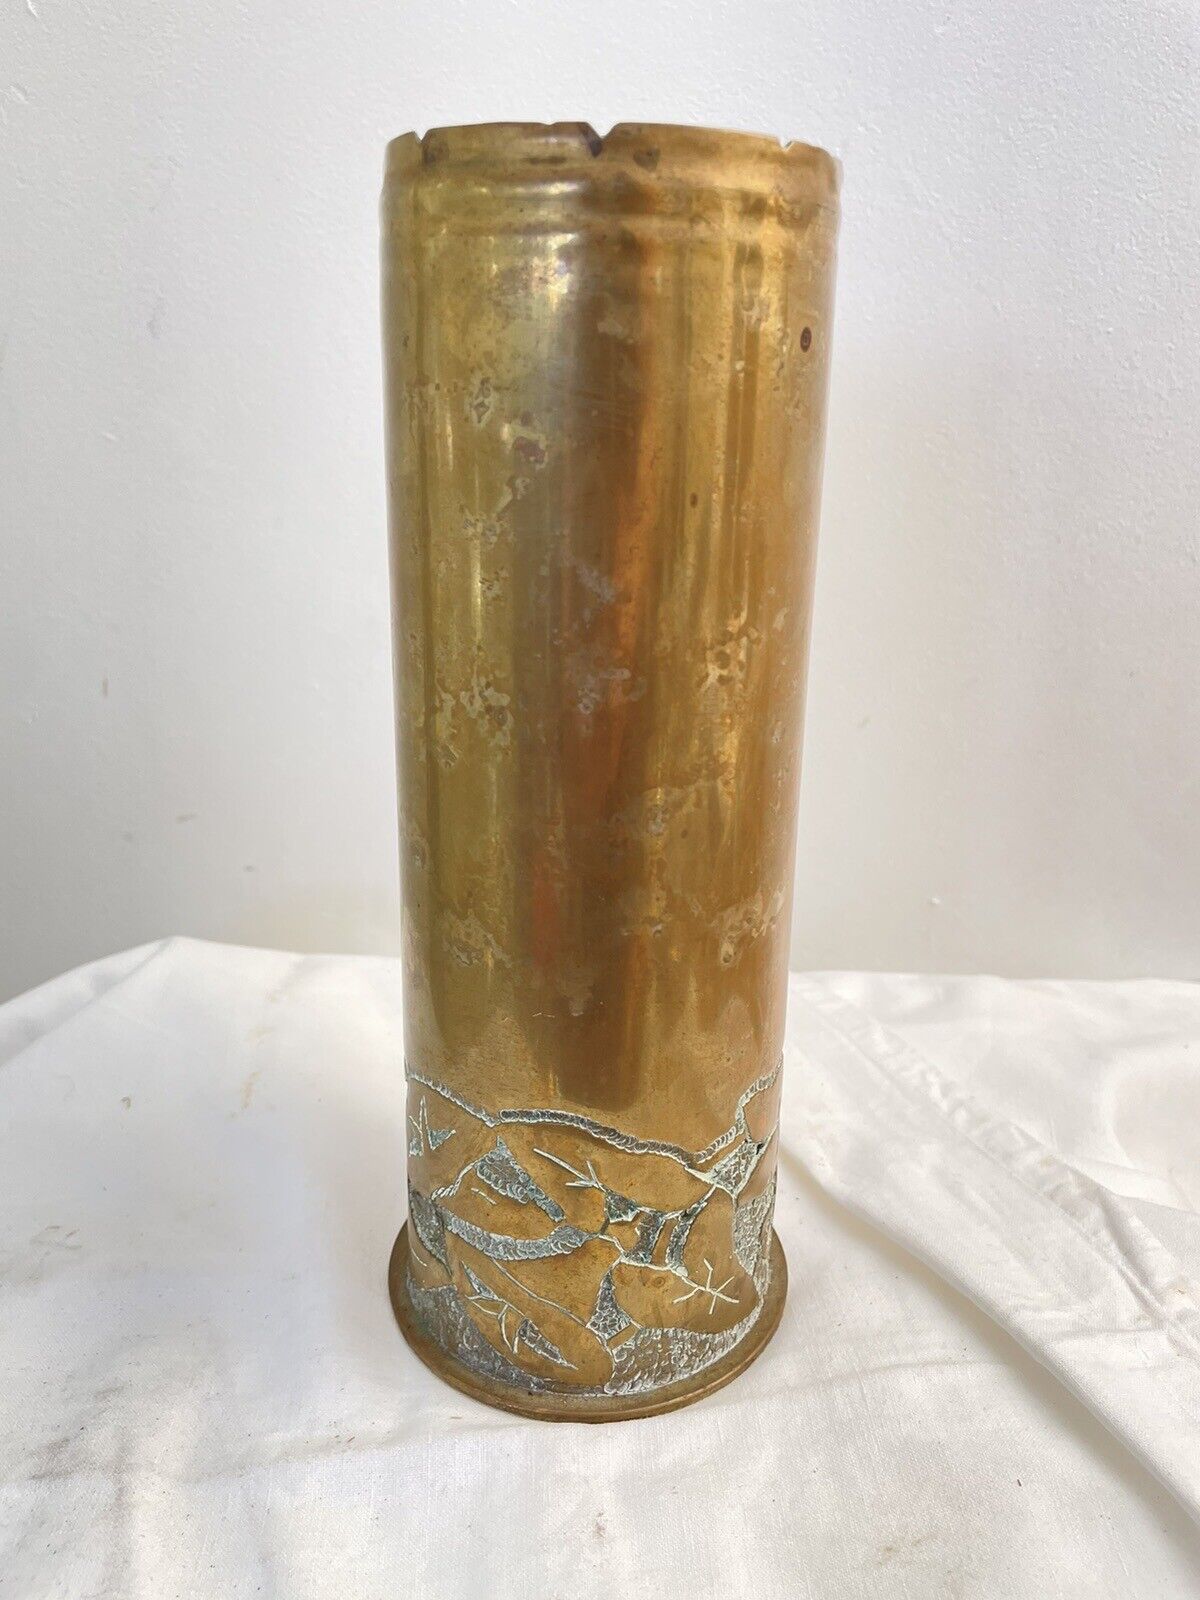 Antique WWI Shell Casing Trench Art Vase Militaria 1918 Brass Leaves Hand Made